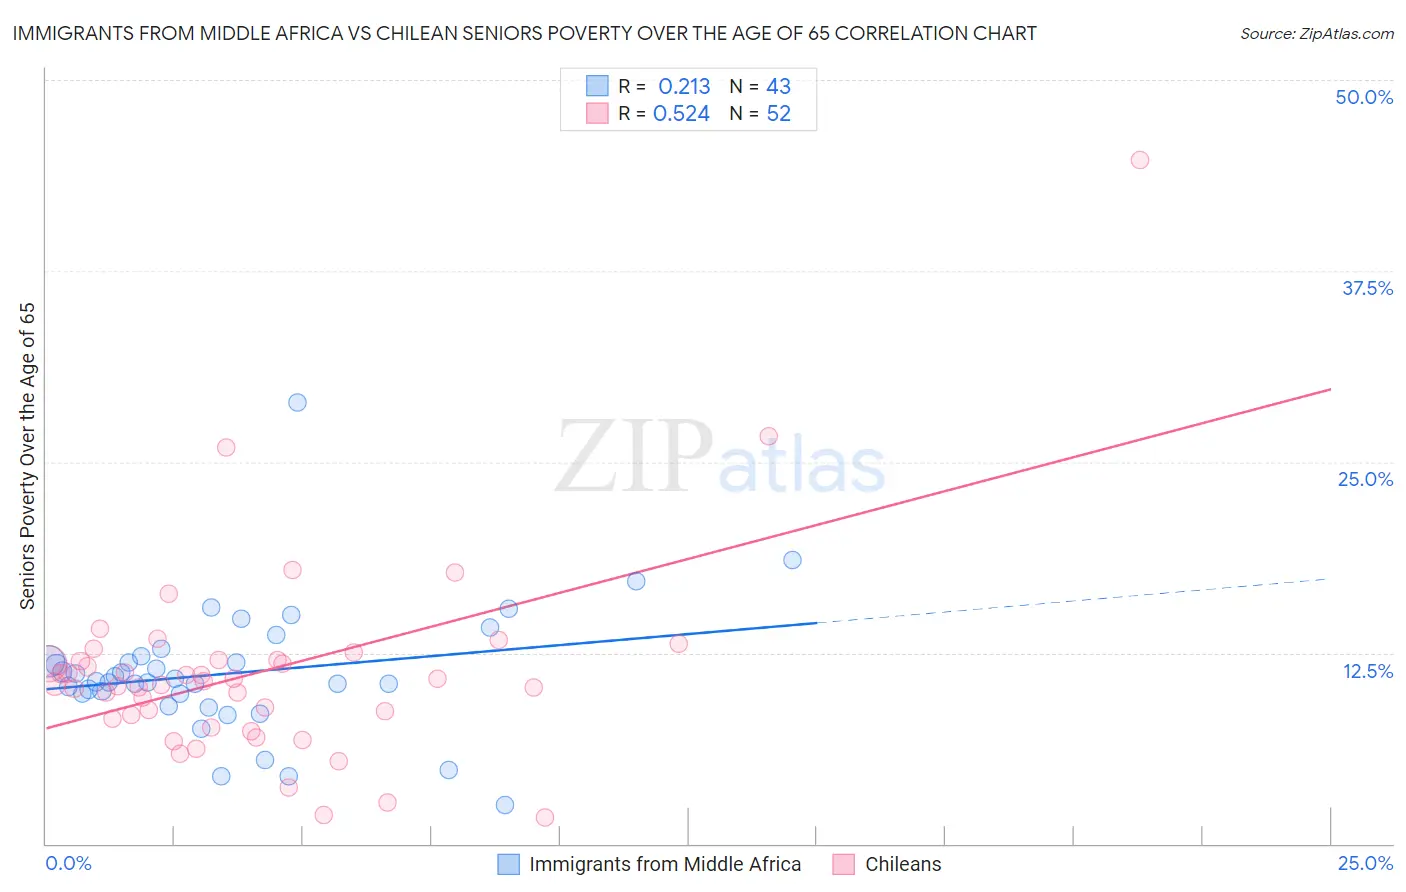 Immigrants from Middle Africa vs Chilean Seniors Poverty Over the Age of 65